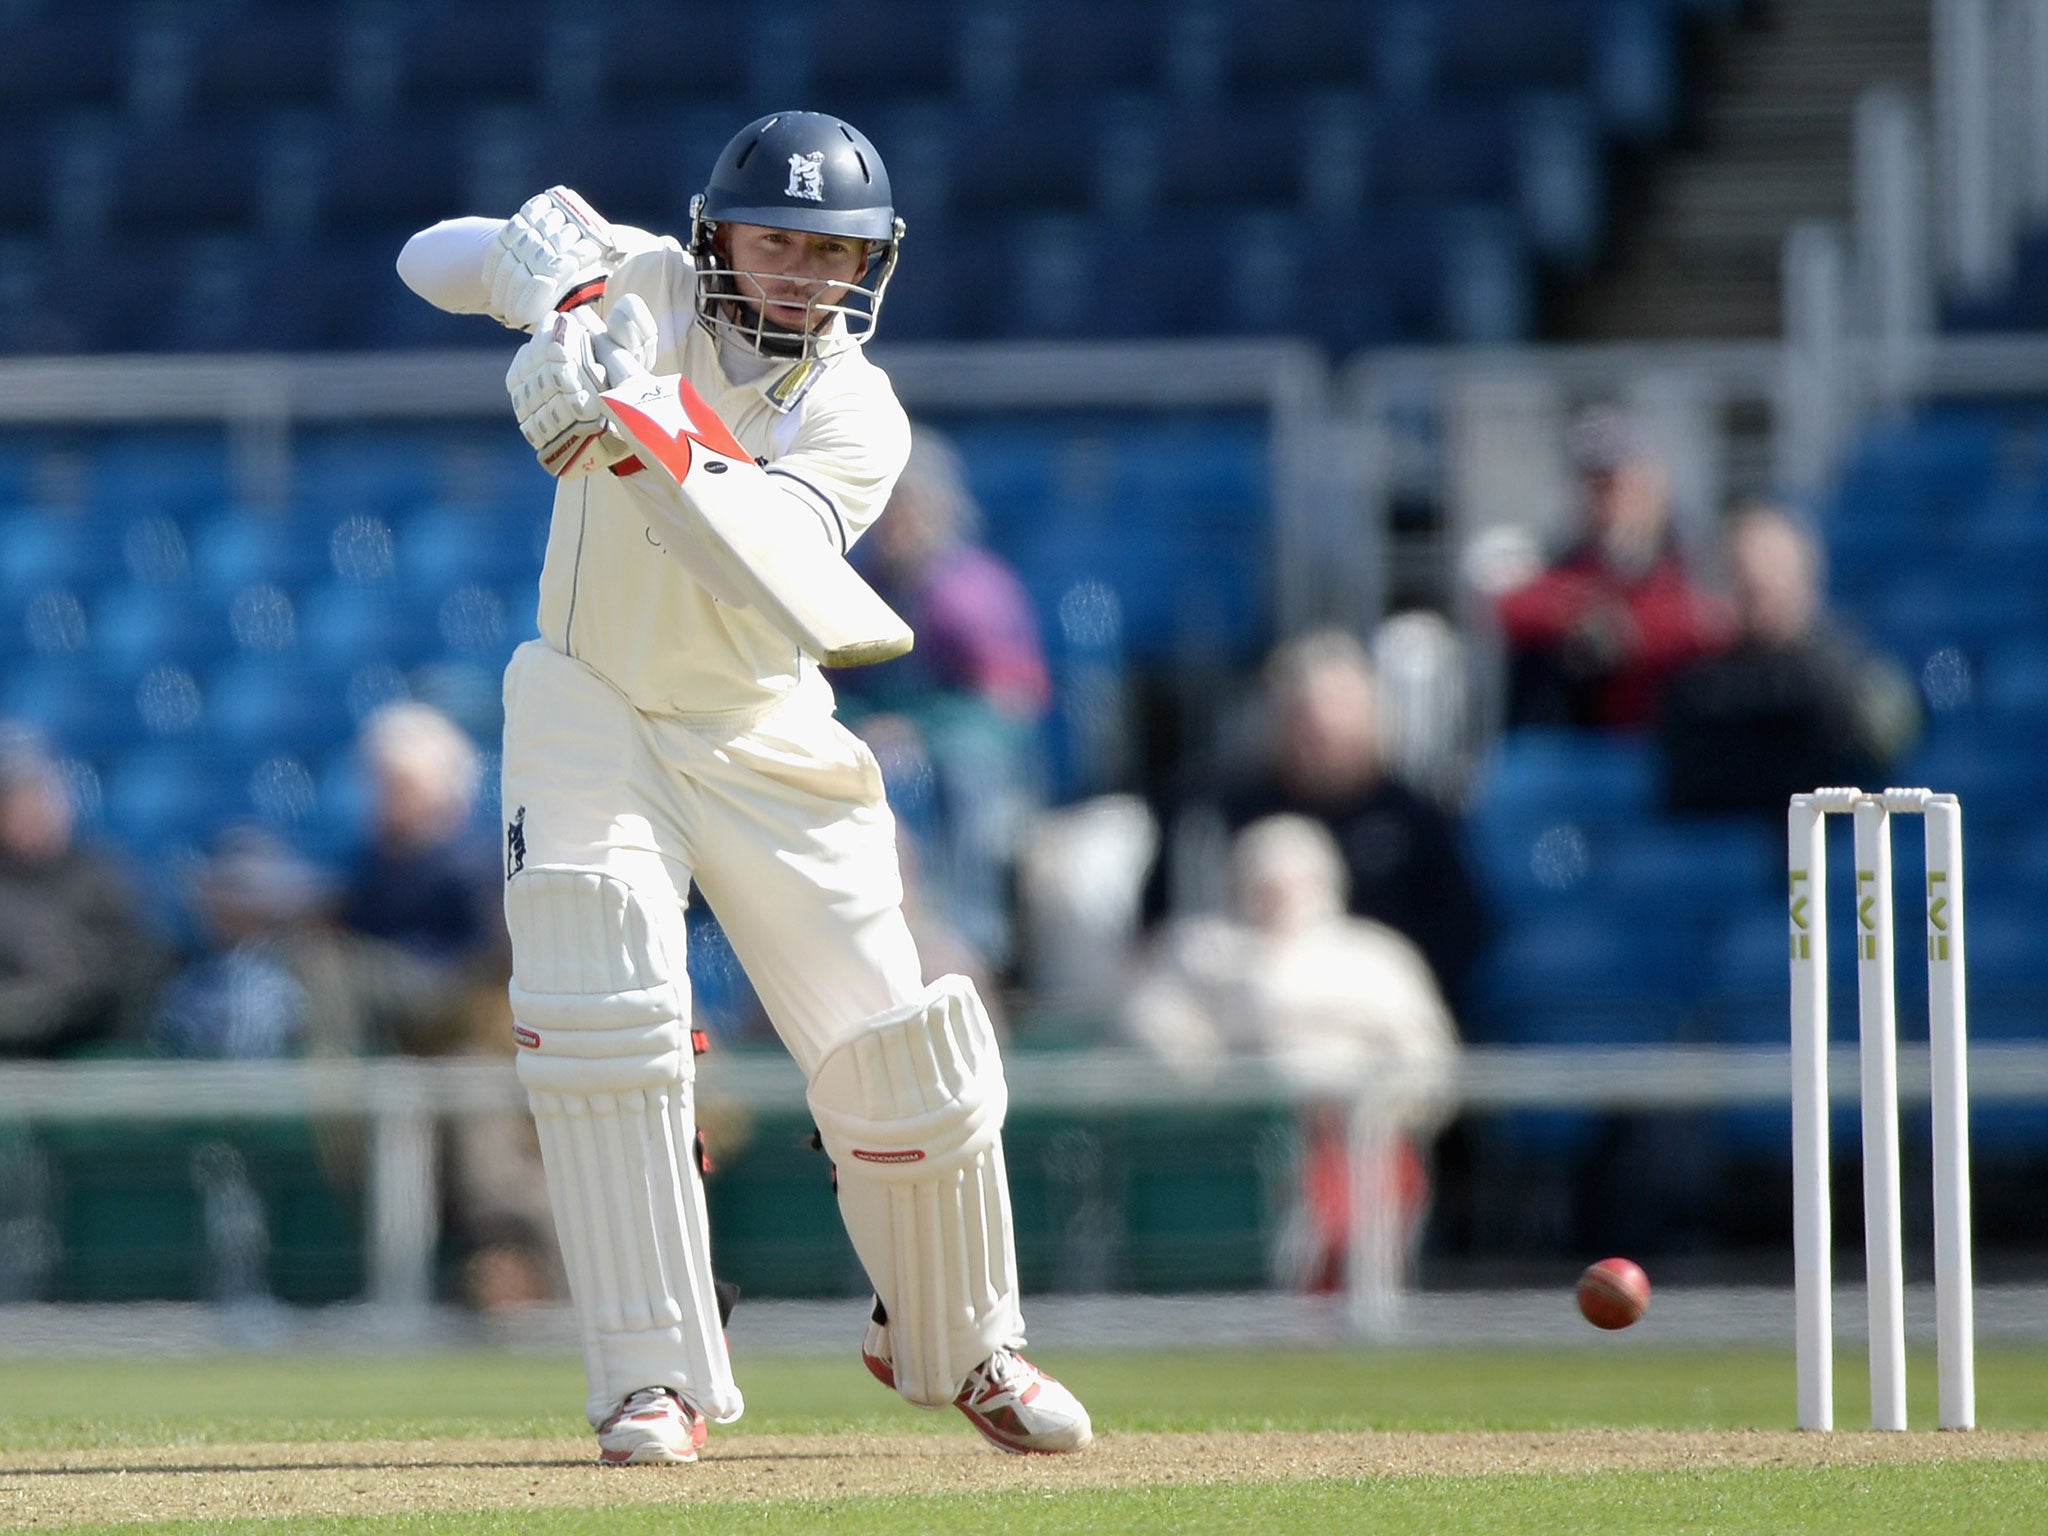 Warwickshire’s opening batsman Ian Westwood drives through the covers against last season’s champions Yorkshire